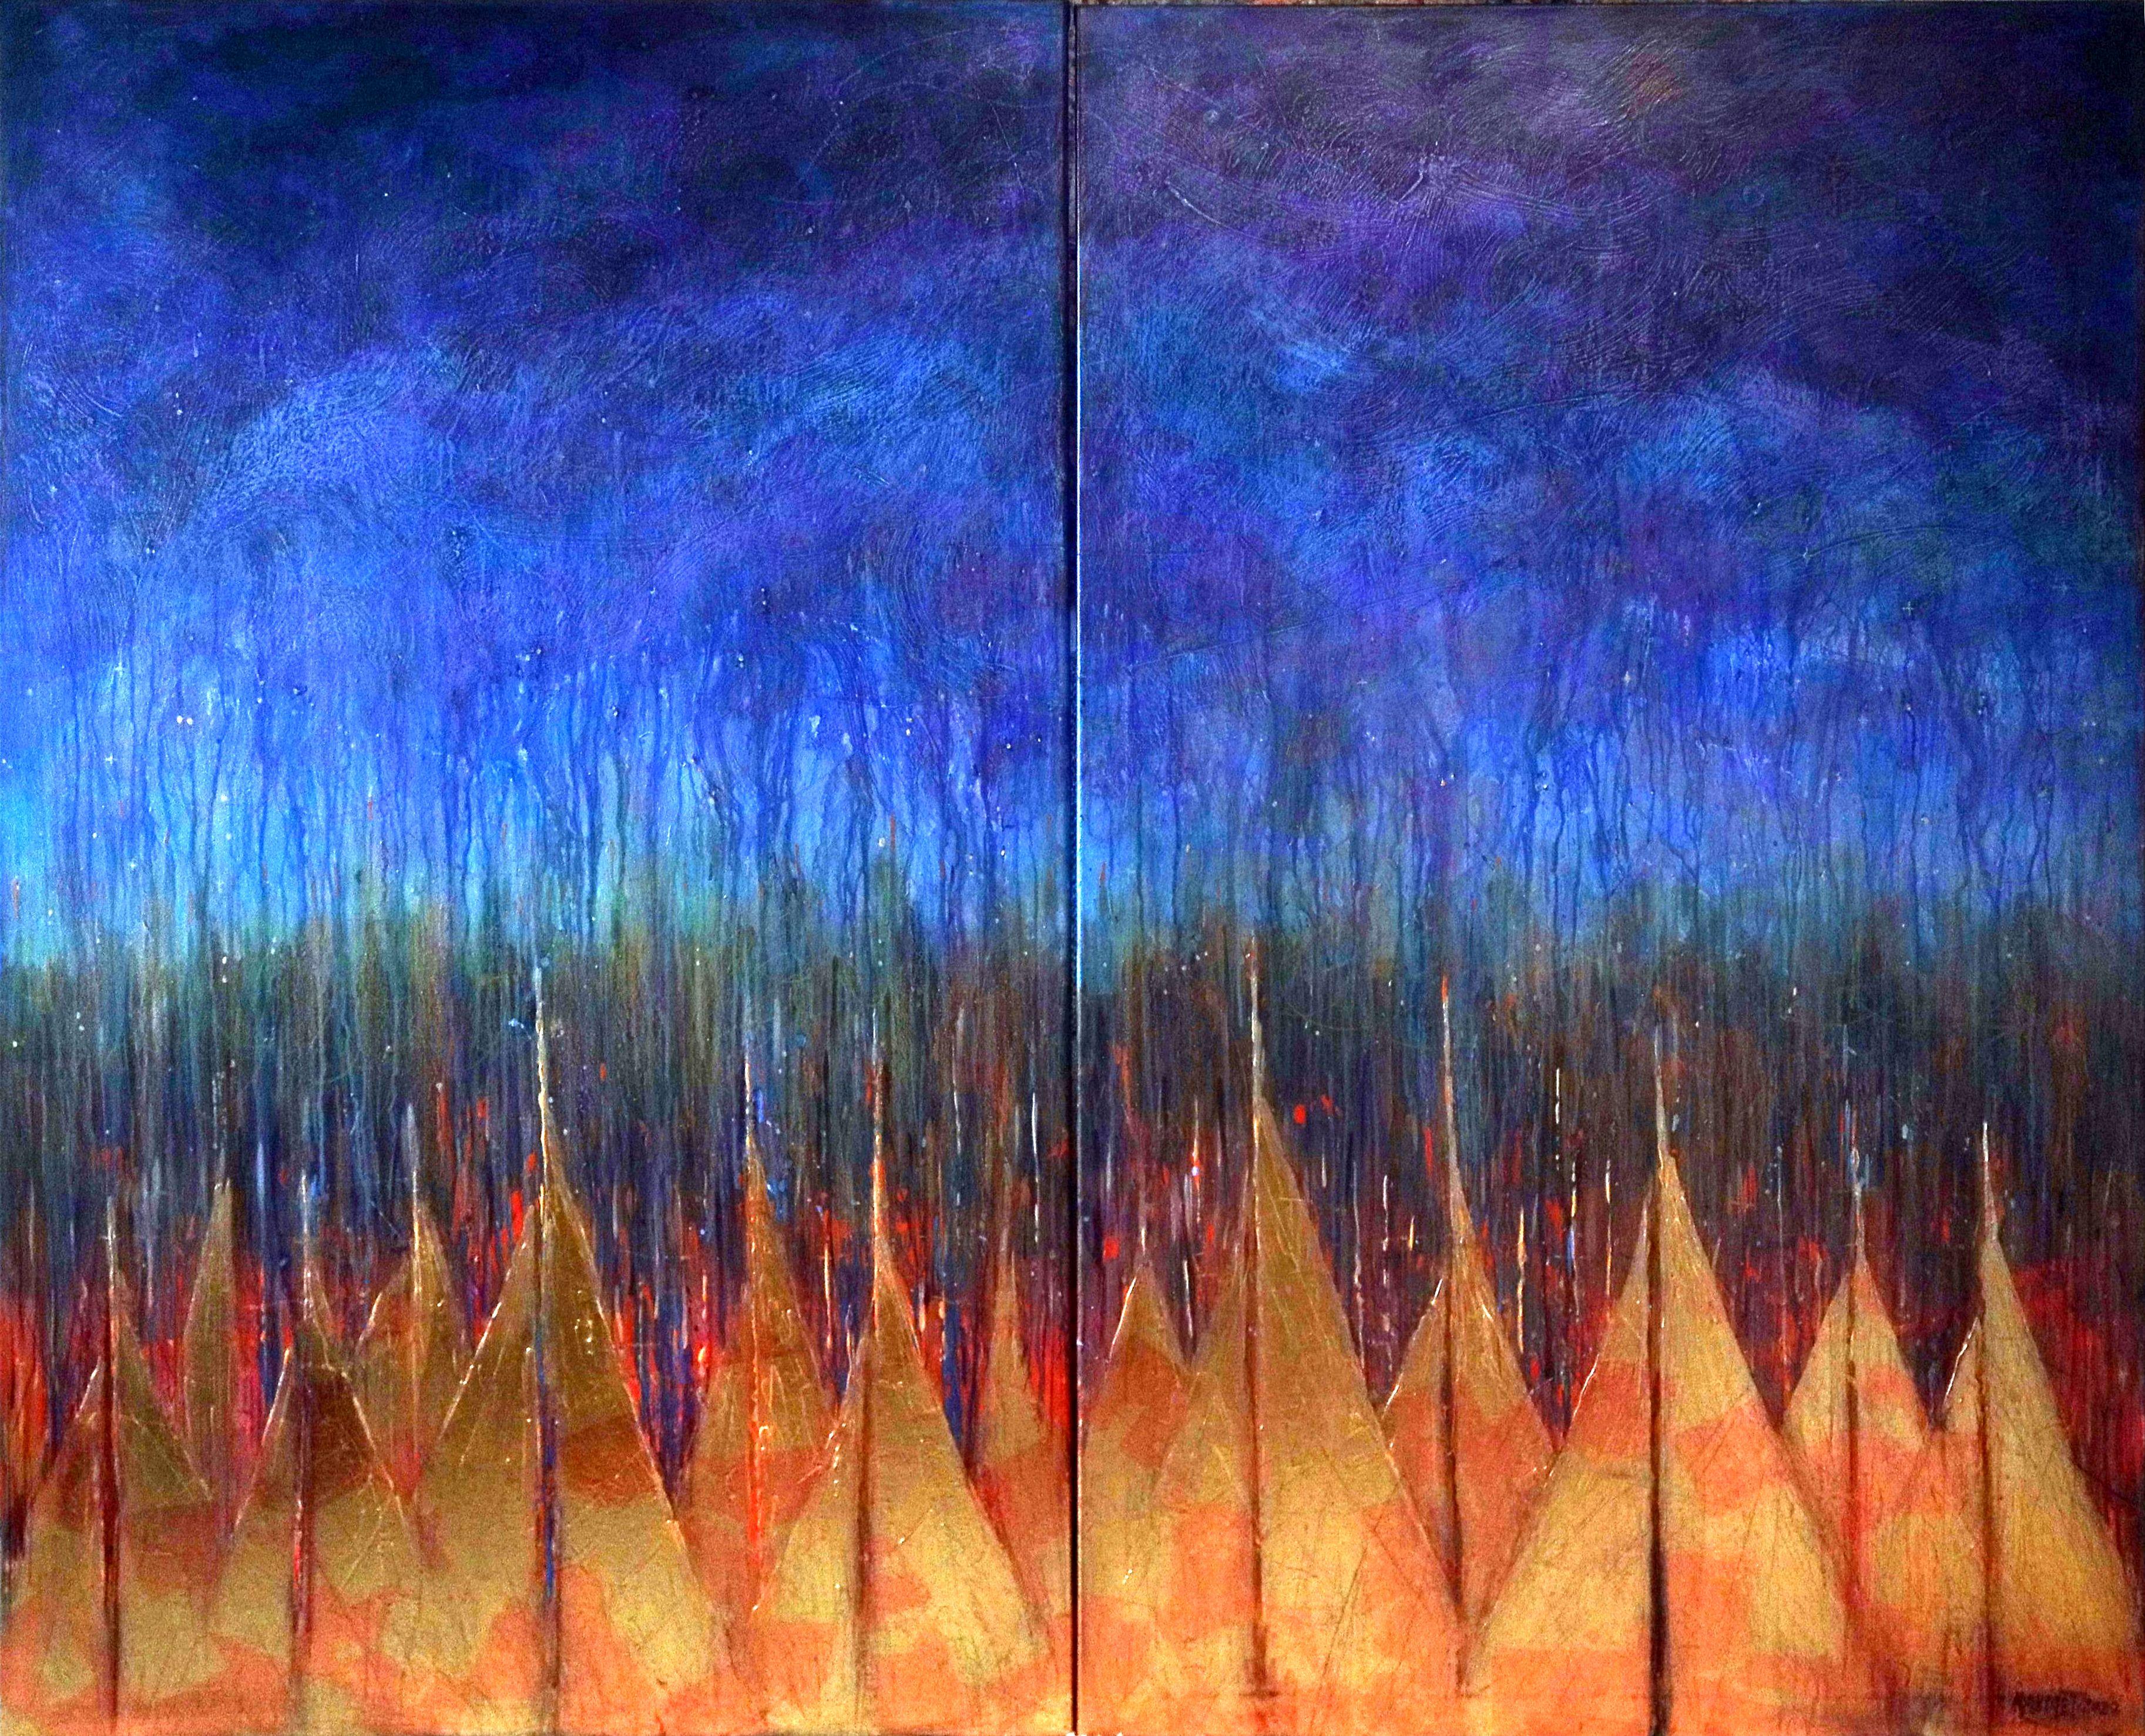 In this expressive diptych, I capture the ethereal grace of dawn's first light. Using acrylics, oils, and oil pastels, I've created a symphony of color where the golden sails, symbolic of hope and dreams, rise against the deep blues of life's